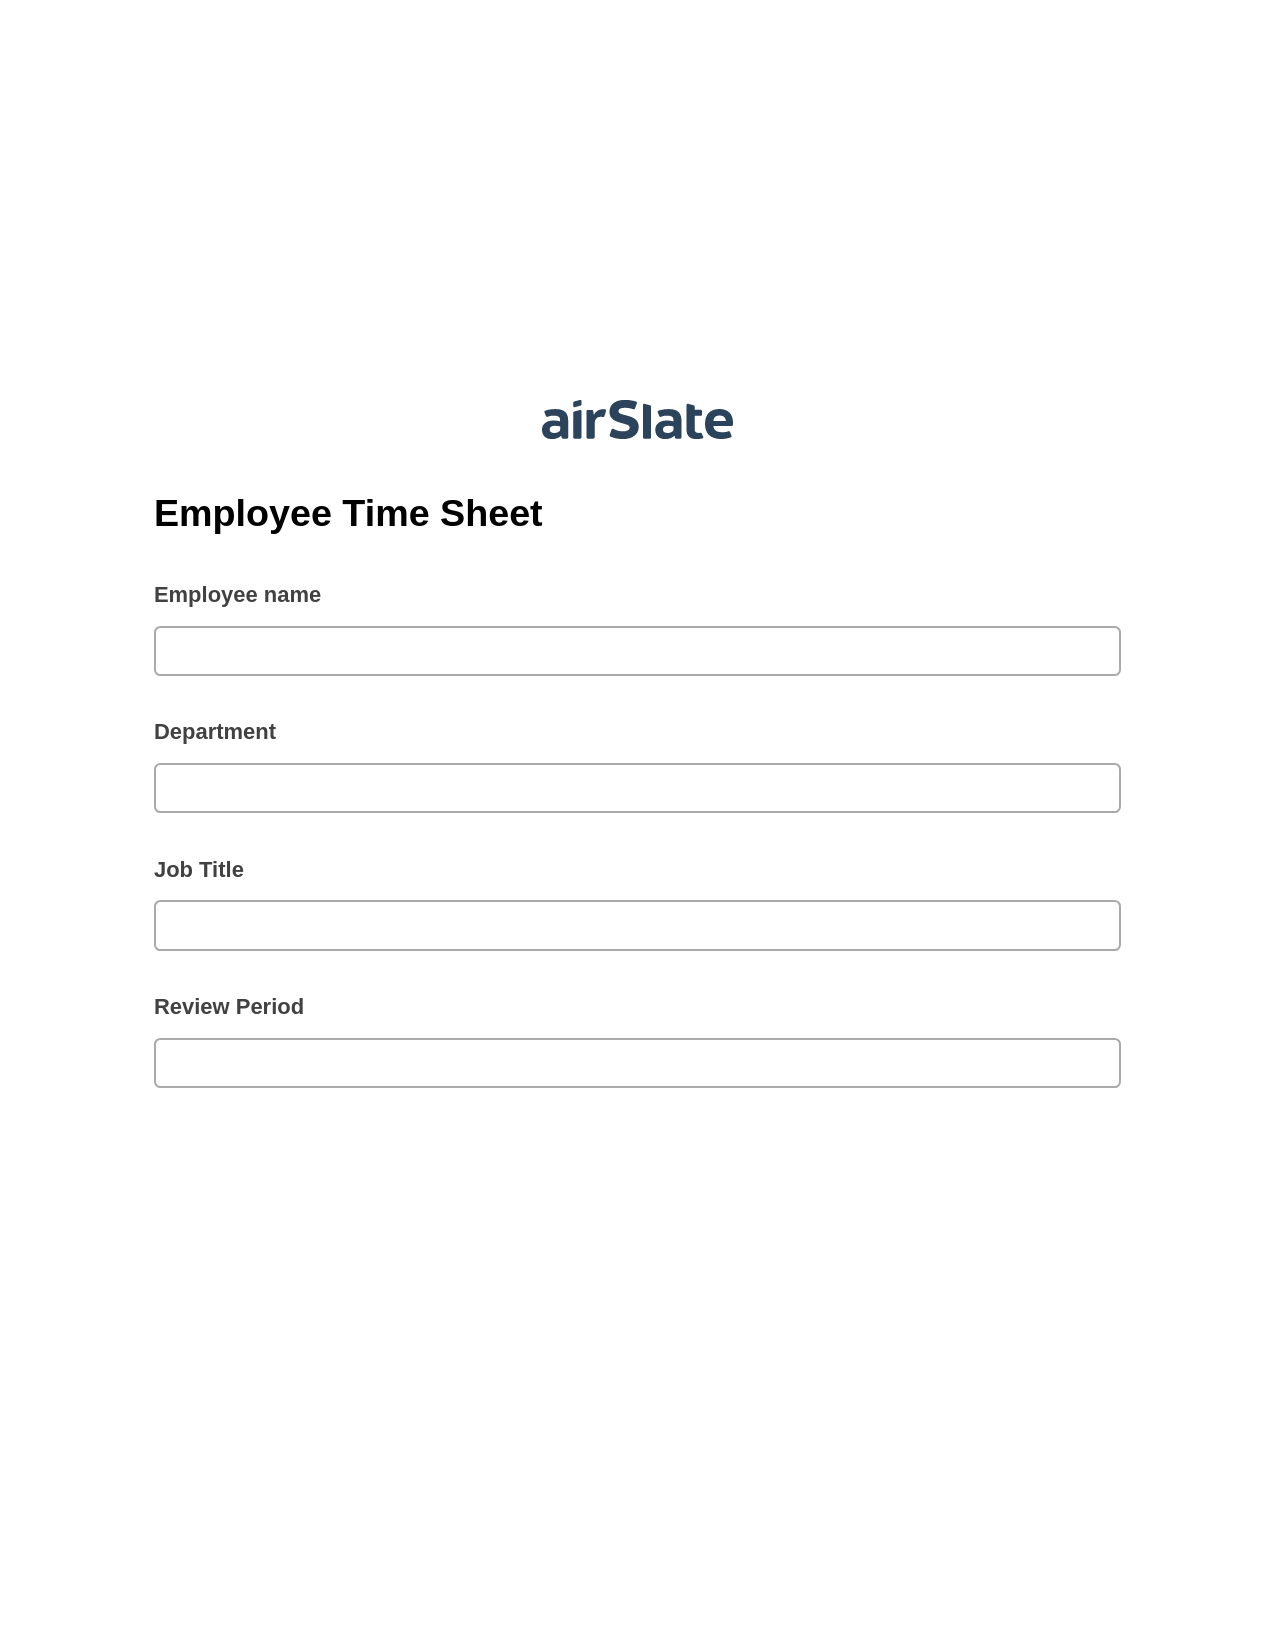 Multirole Employee Time Sheet Prefill from NetSuite records, Create slate addon, Export to Excel 365 Bot